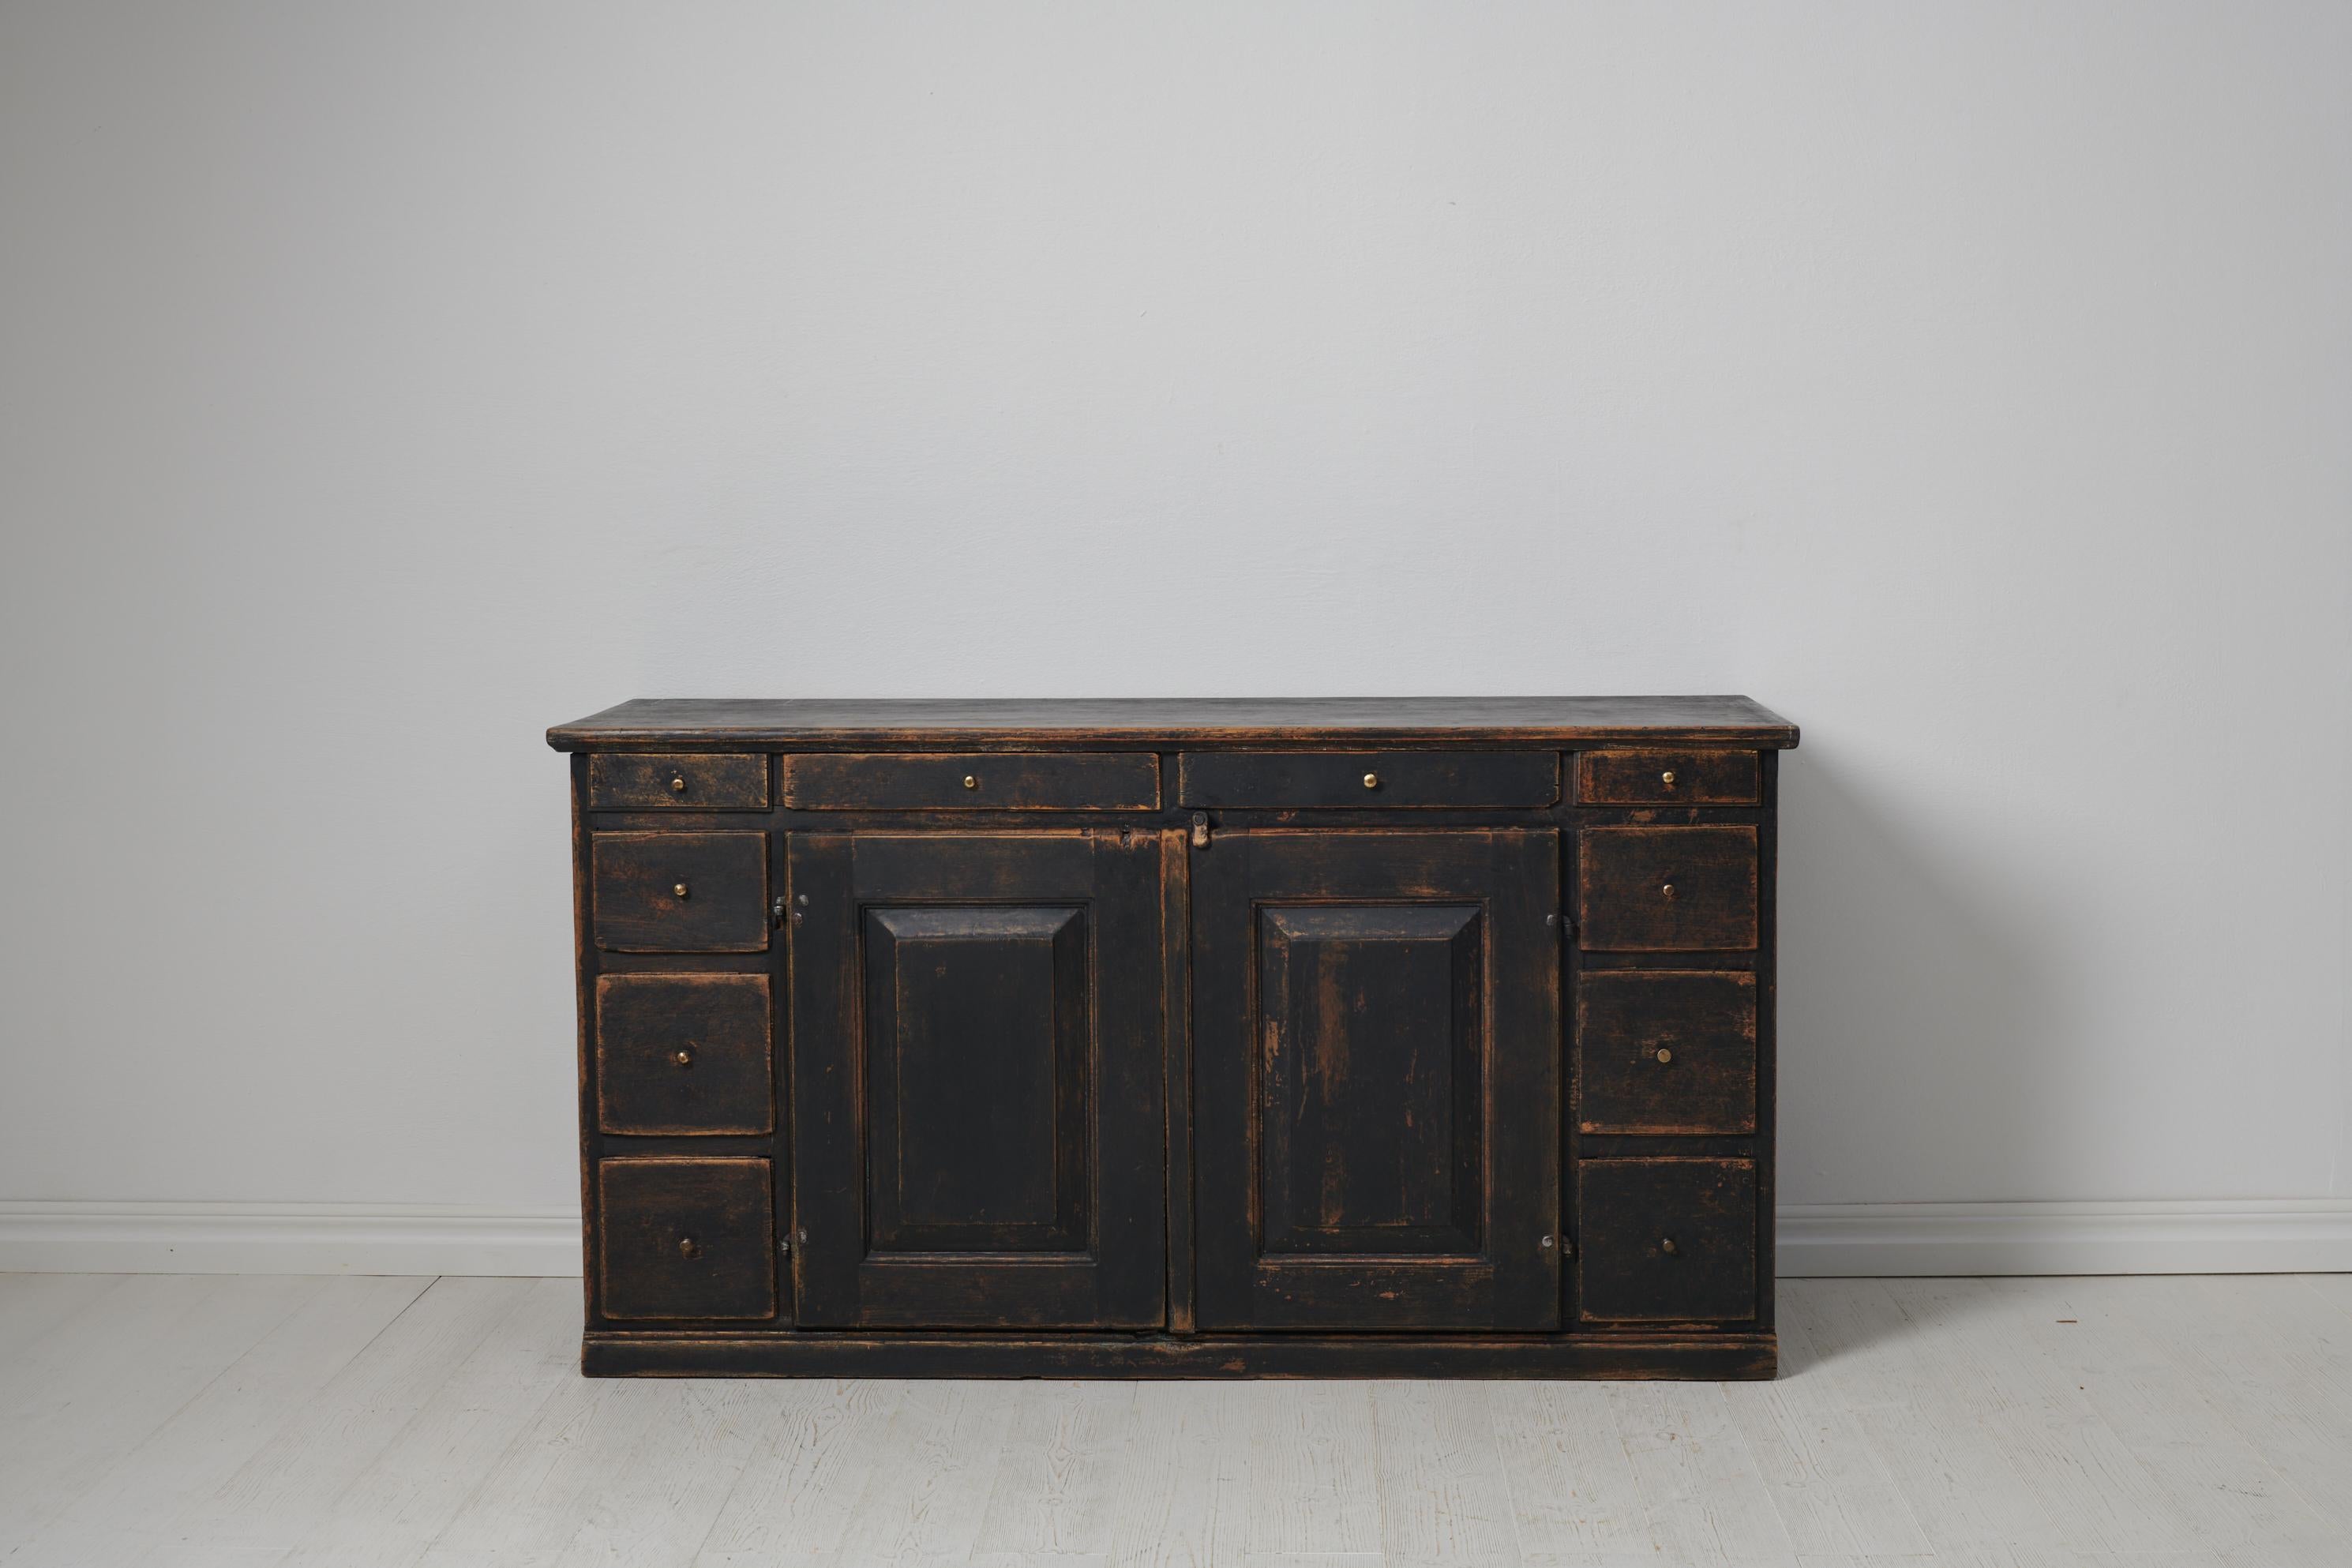 Swedish antique country sideboard from the 1800s. The sideboard is a genuine Swedish country sideboard made by hand in solid pine in northern Sweden around 1840. The sideboard is low and wide with double doors and 10 drawers in varying sizes. It has